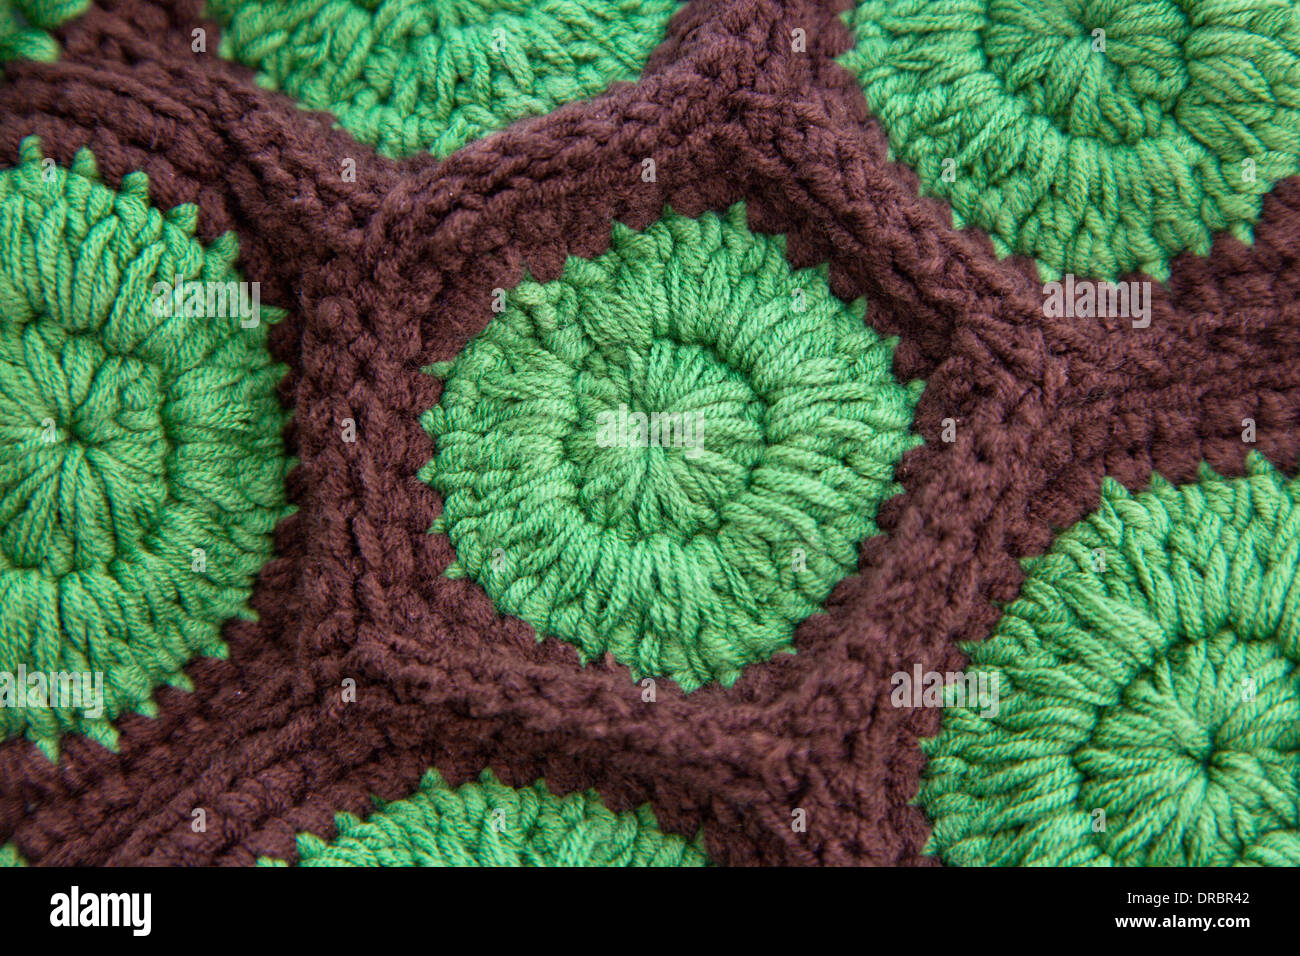 Close-up view of crochet stitch in green and brown yarn. Stock Photo